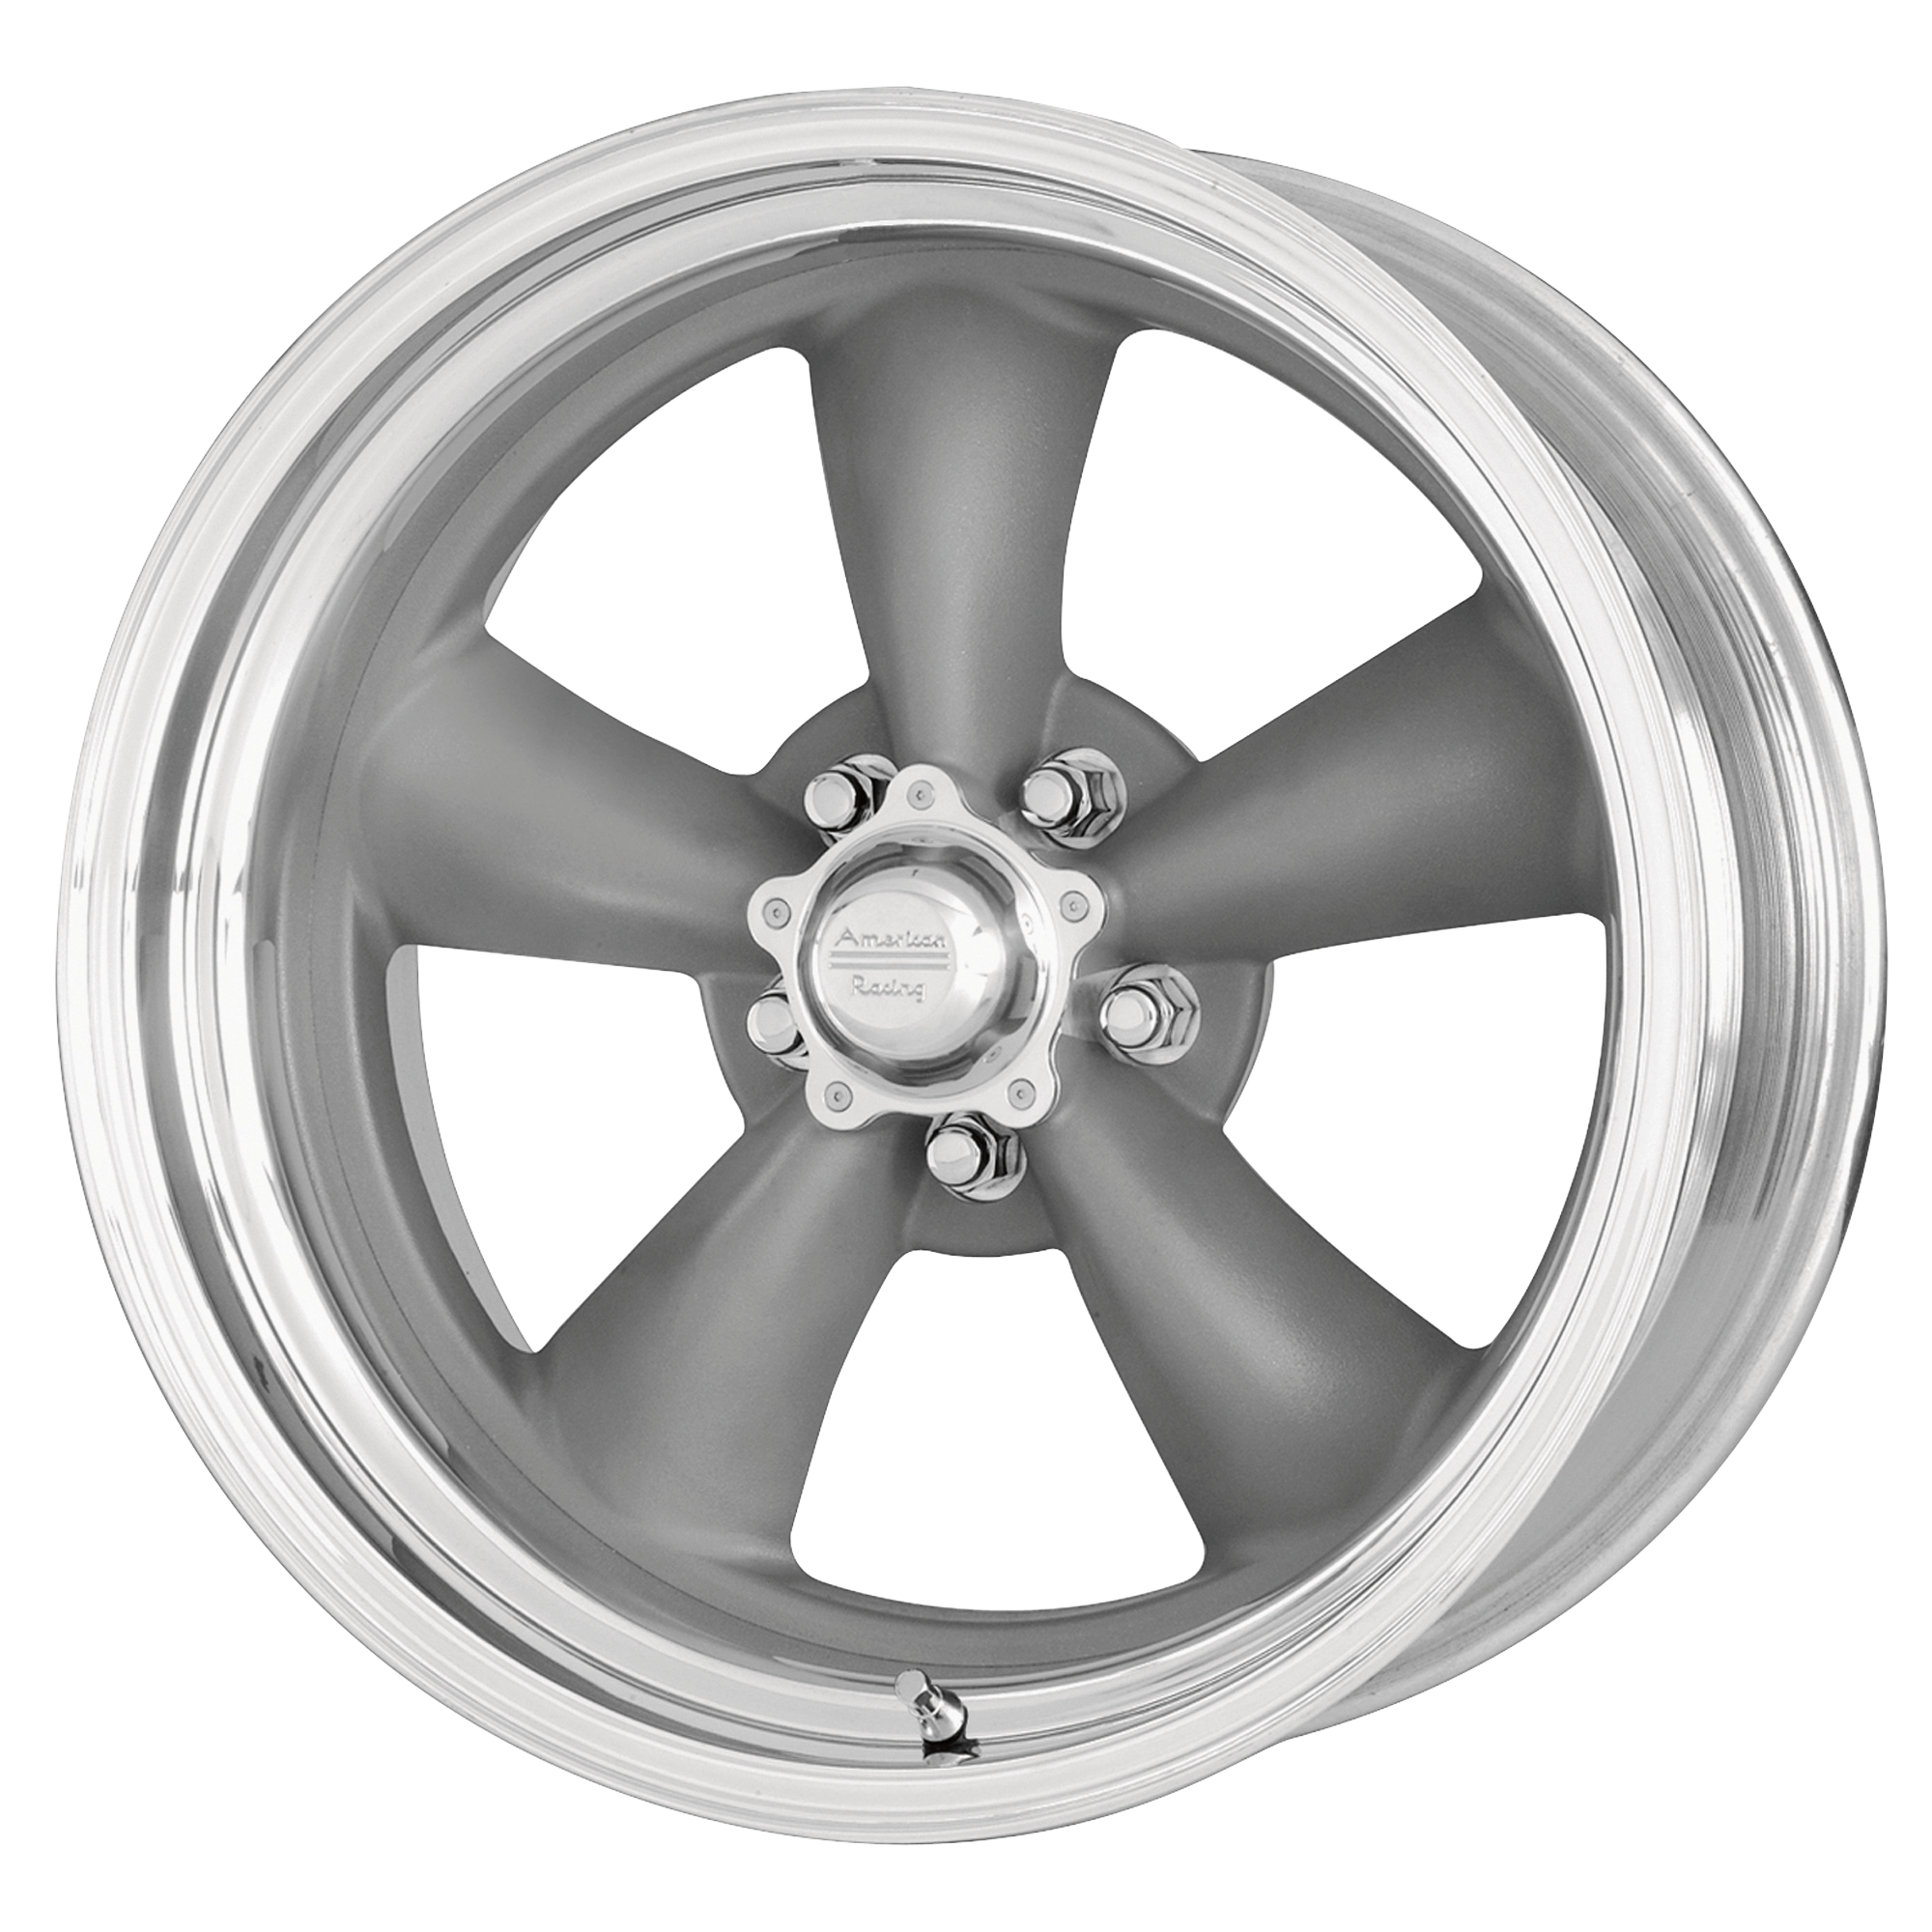 CLASSIC TORQ THRUST II ONE PIECE 16x8 5x114.30 MAG GRAY W/ MACHINED LIP (10 mm) - Tires and Engine Performance